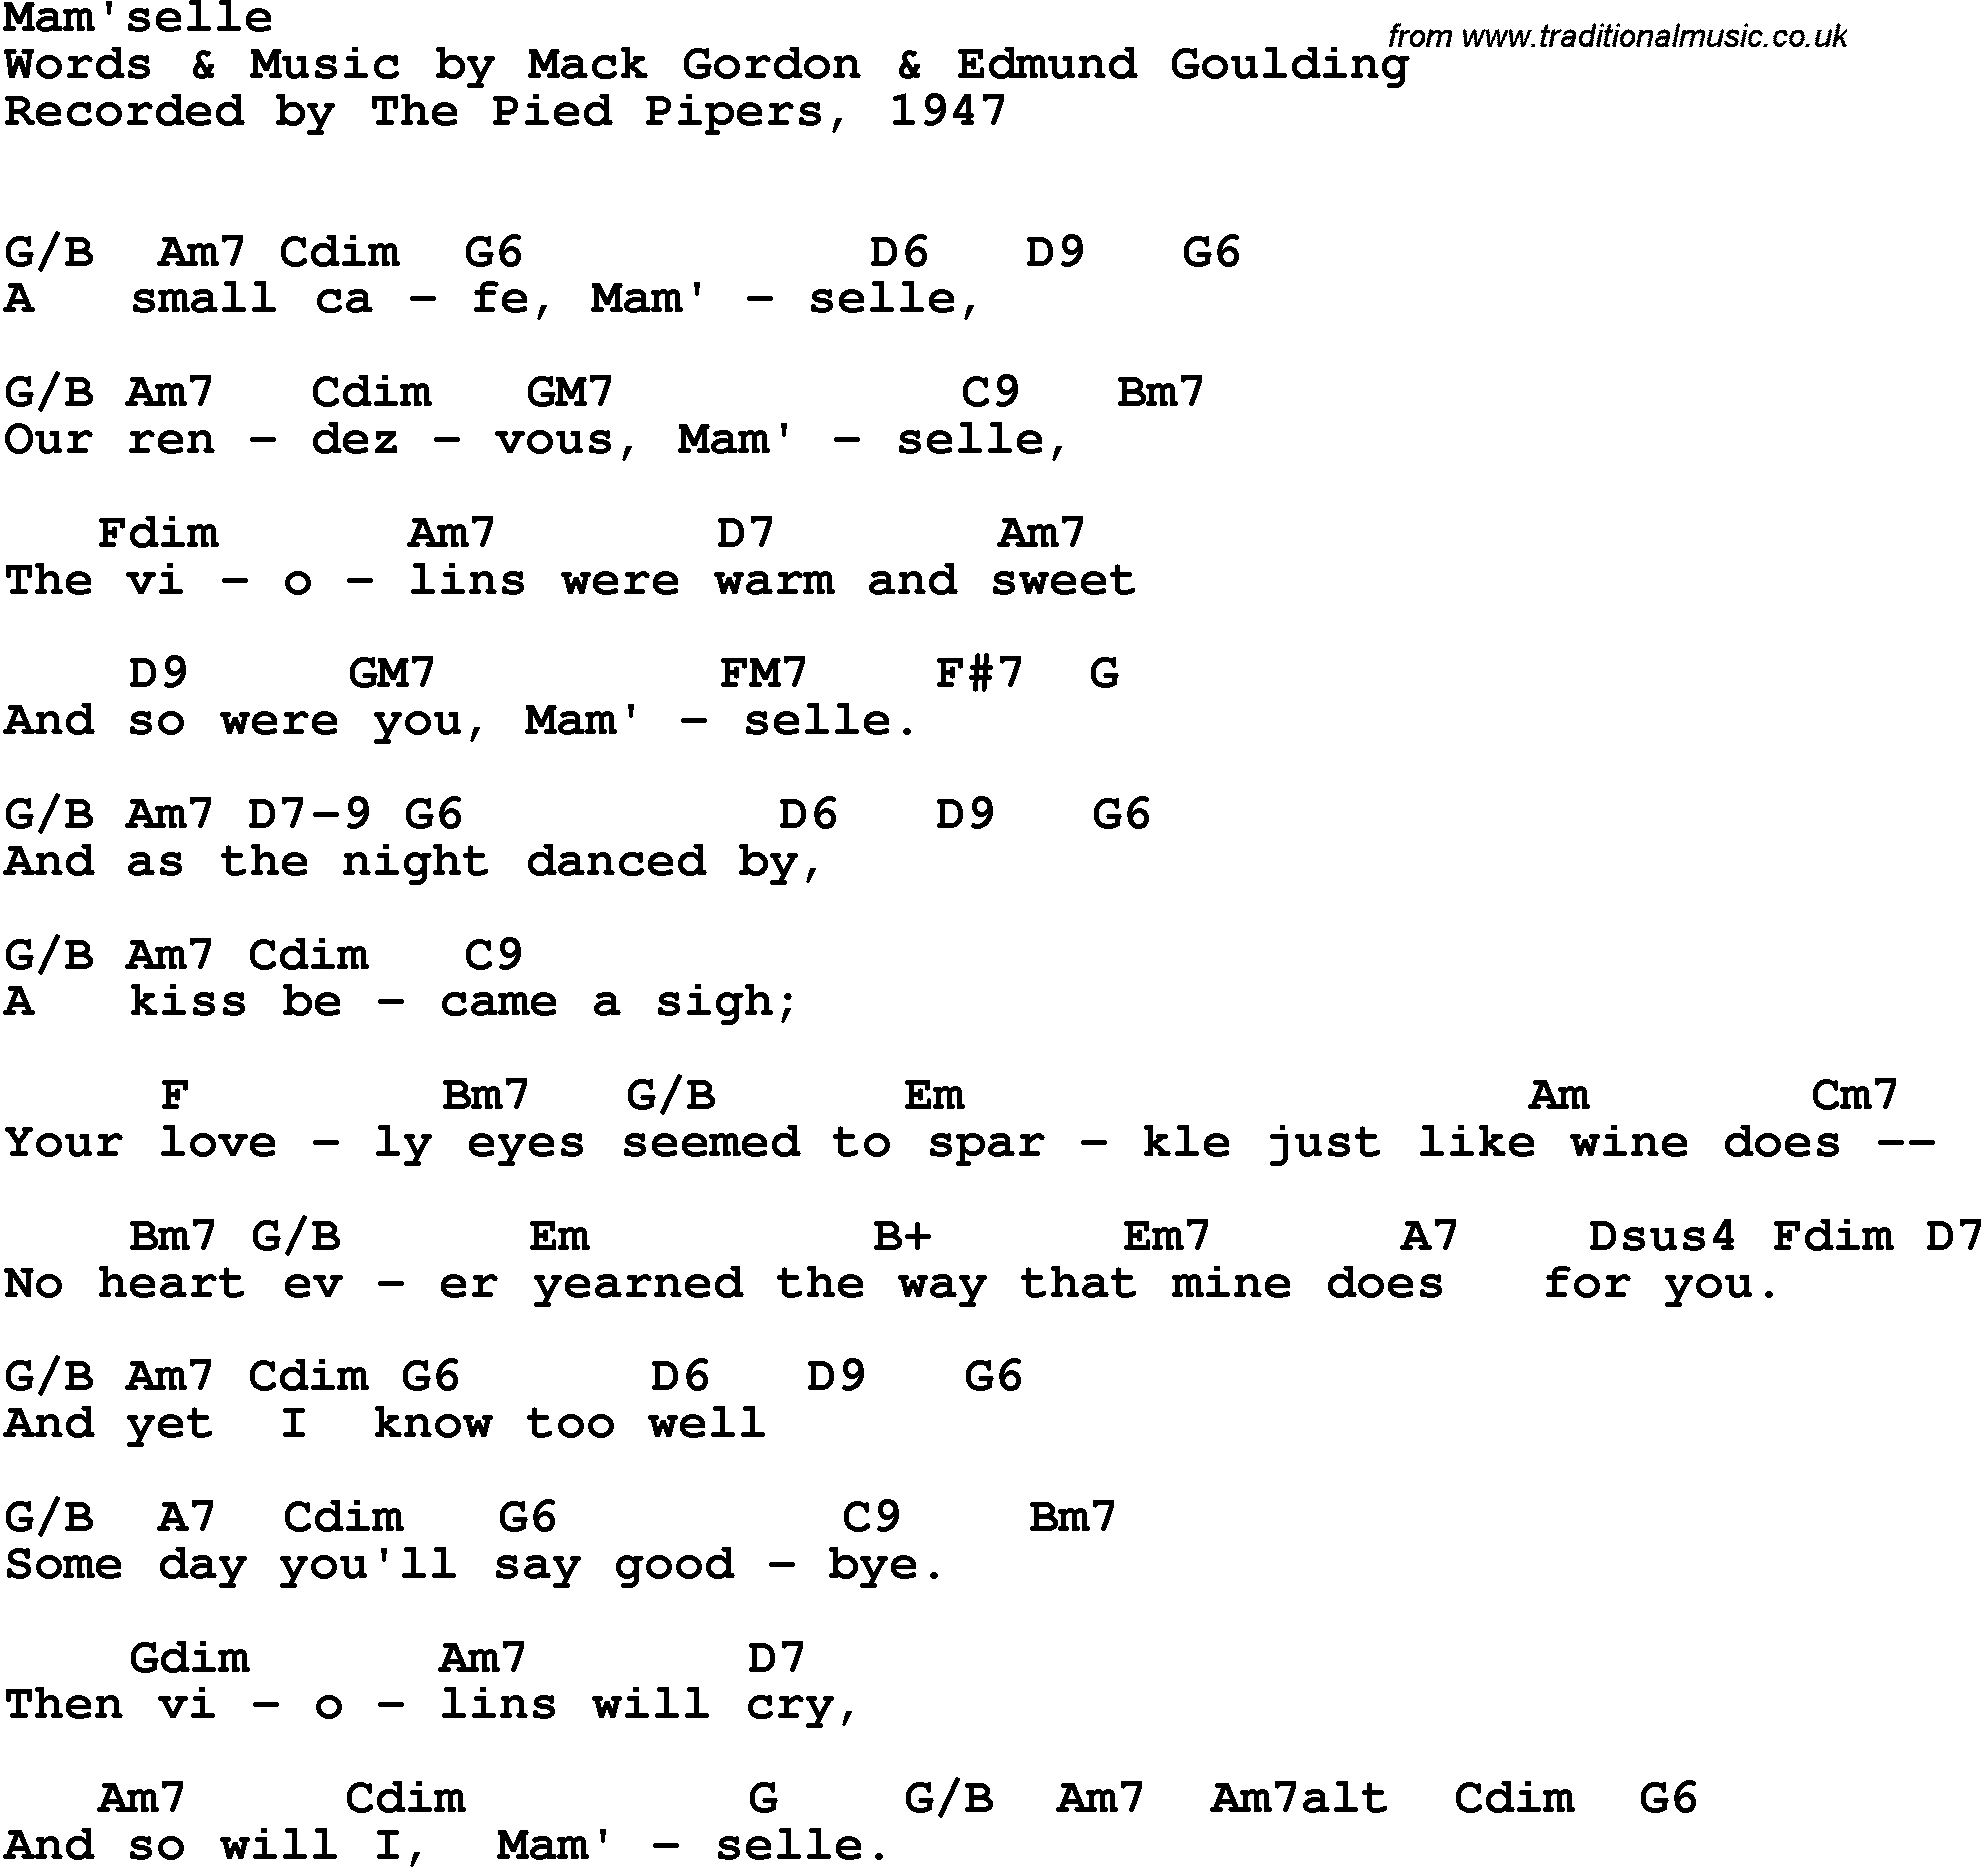 Song Lyrics with guitar chords for Mam'selle - The Pied Pipers, 1947